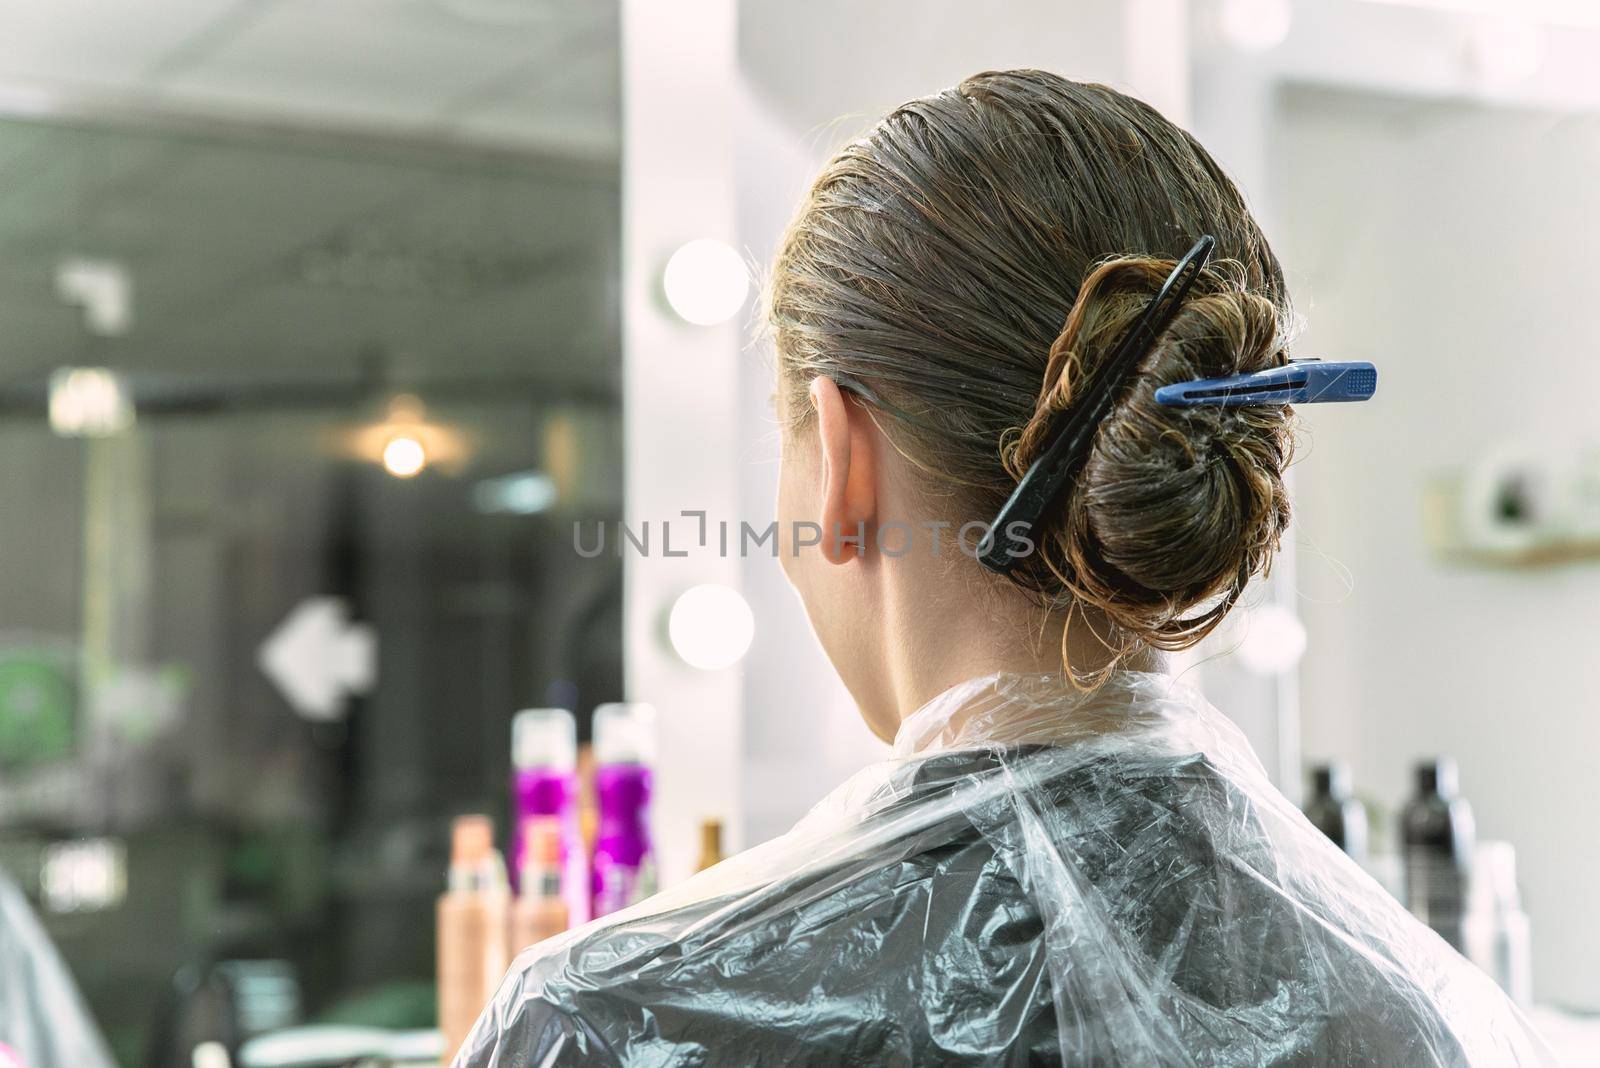 hair coloring in a beauty salon